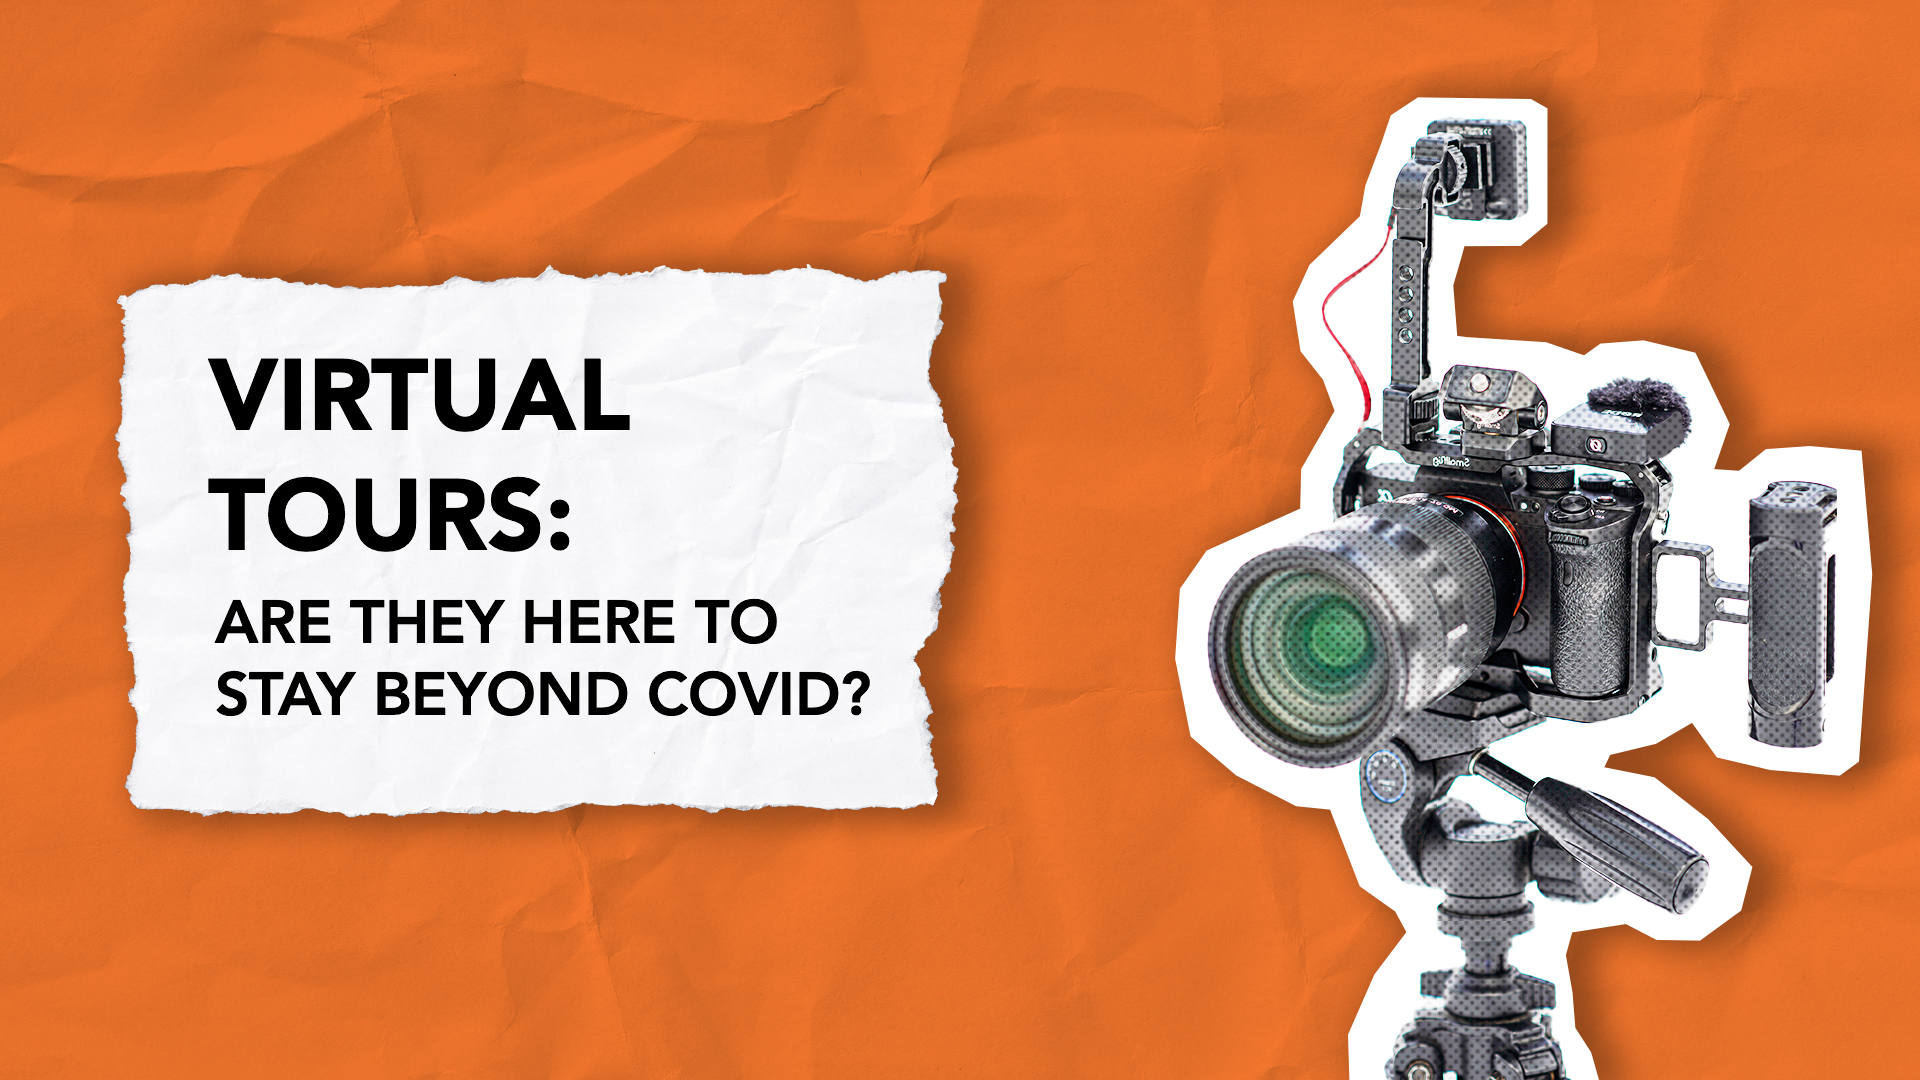 Virtual tours for beyond covid